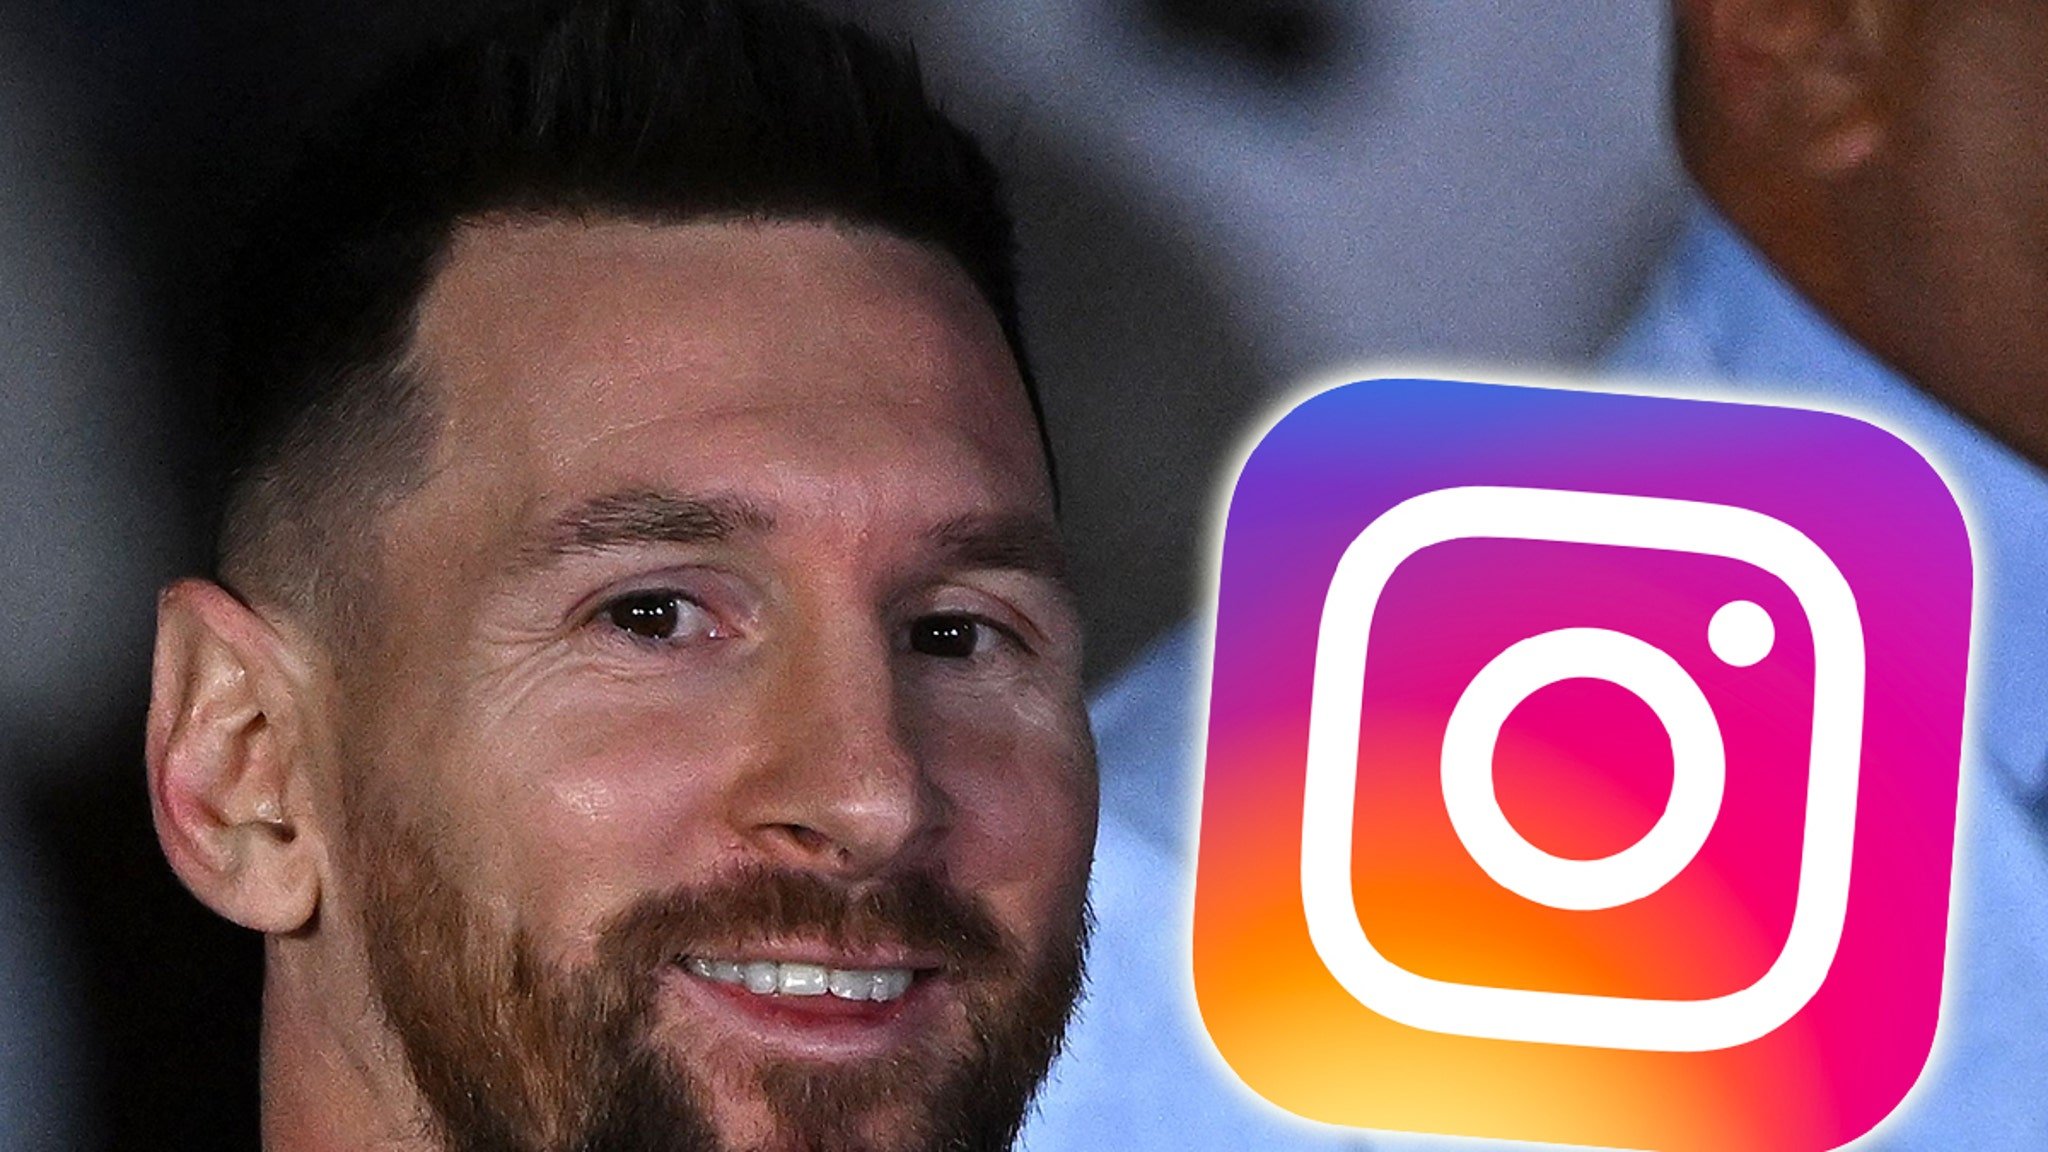 Lionel Messi Surpasses Egg For Most-Liked IG Post ... With W.C. Celebration